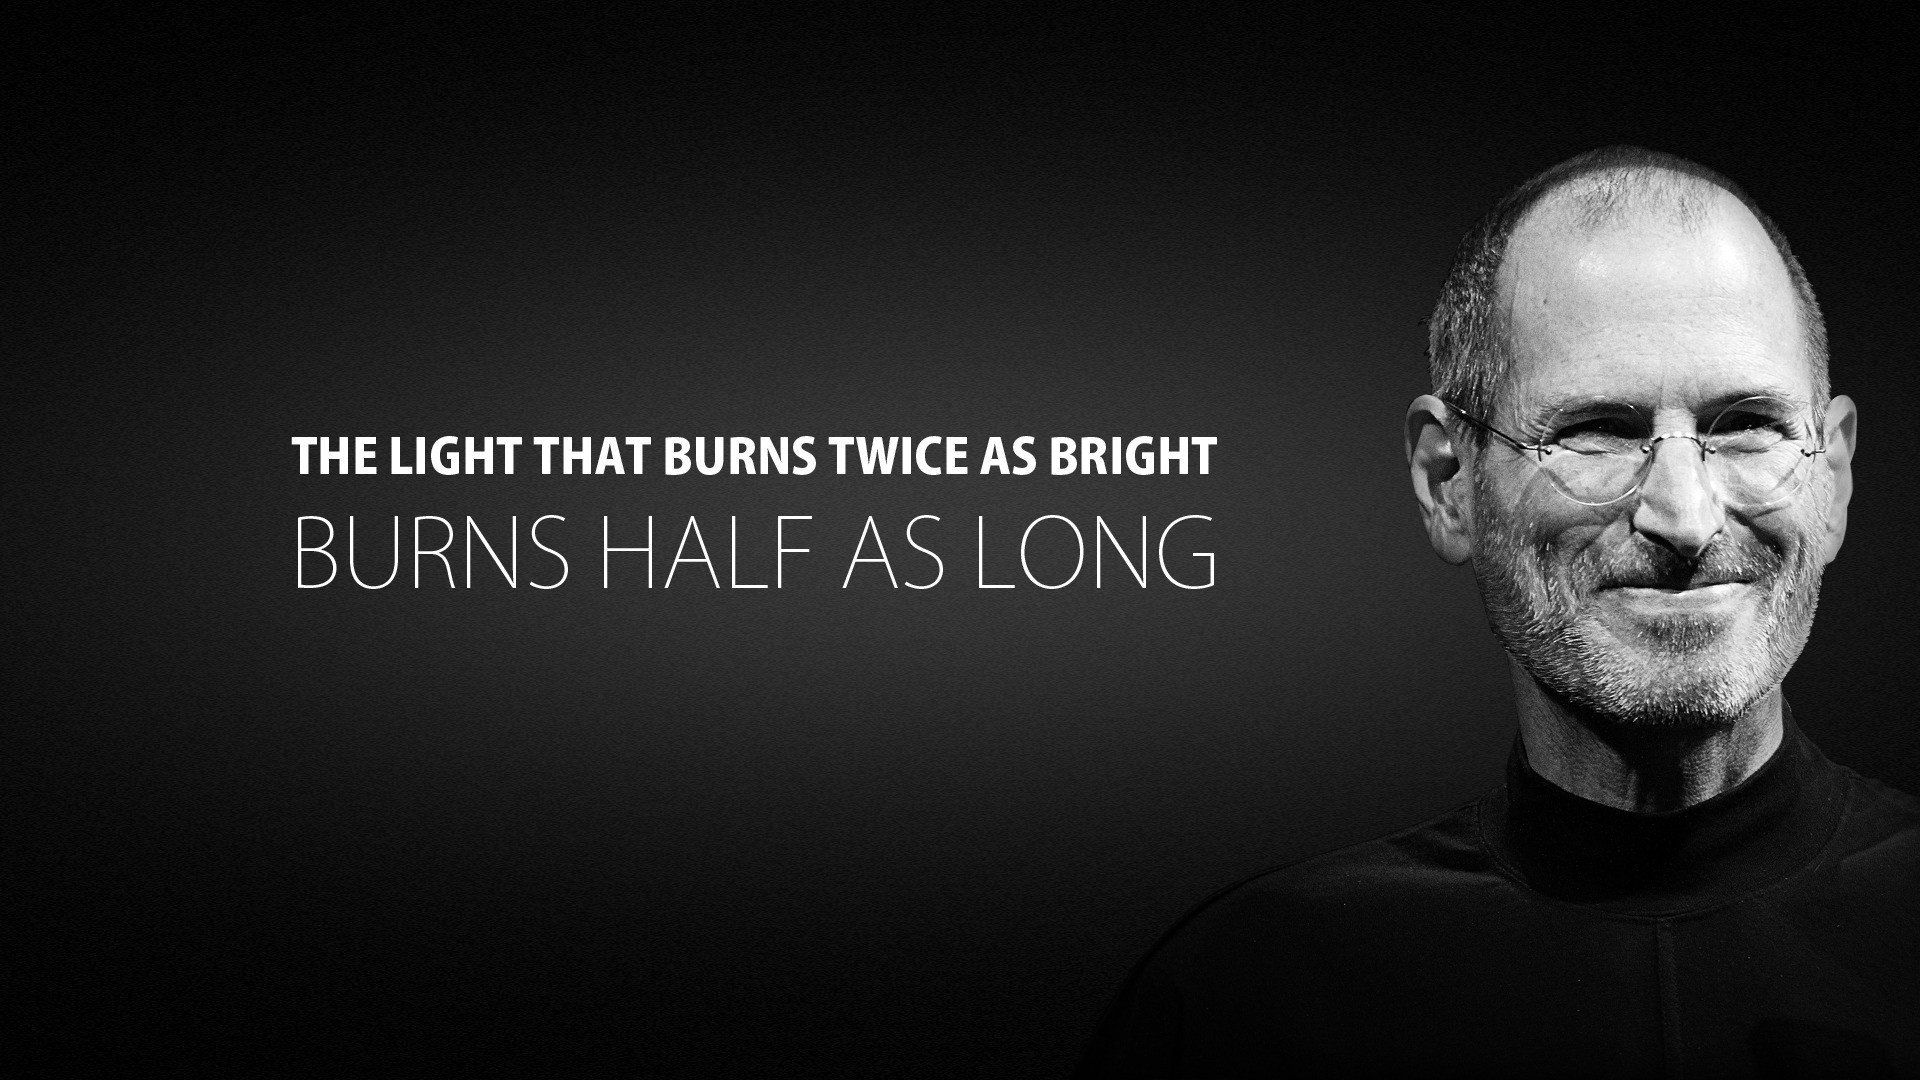 Steve Jobs Quotes Wallpaper For PC